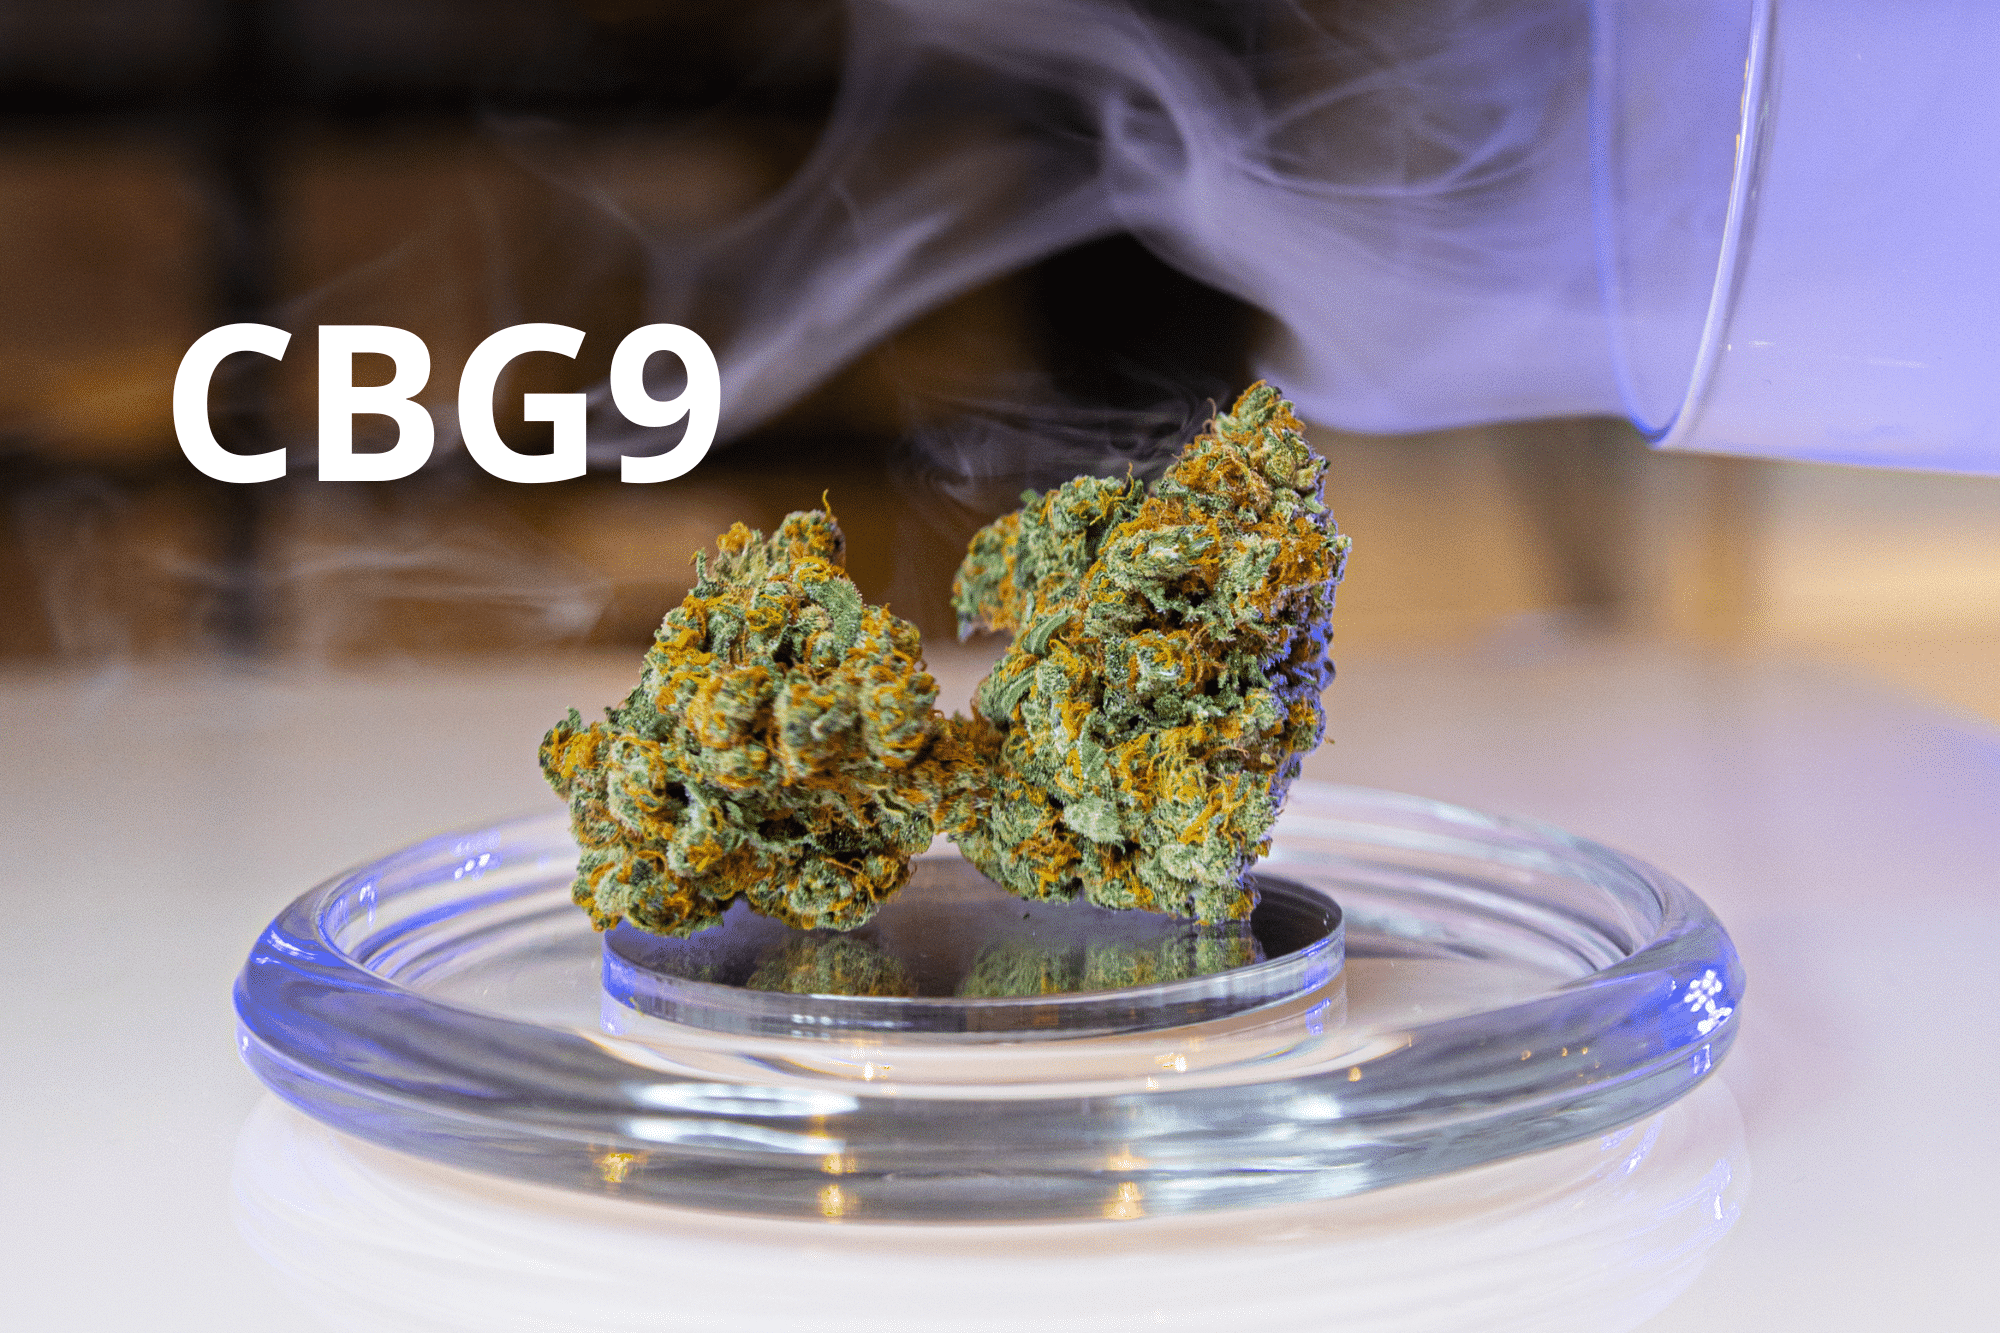 Discovery of CBG9 (cannabigerol 9): A Promising Cannabinoid with Multiple Benefits